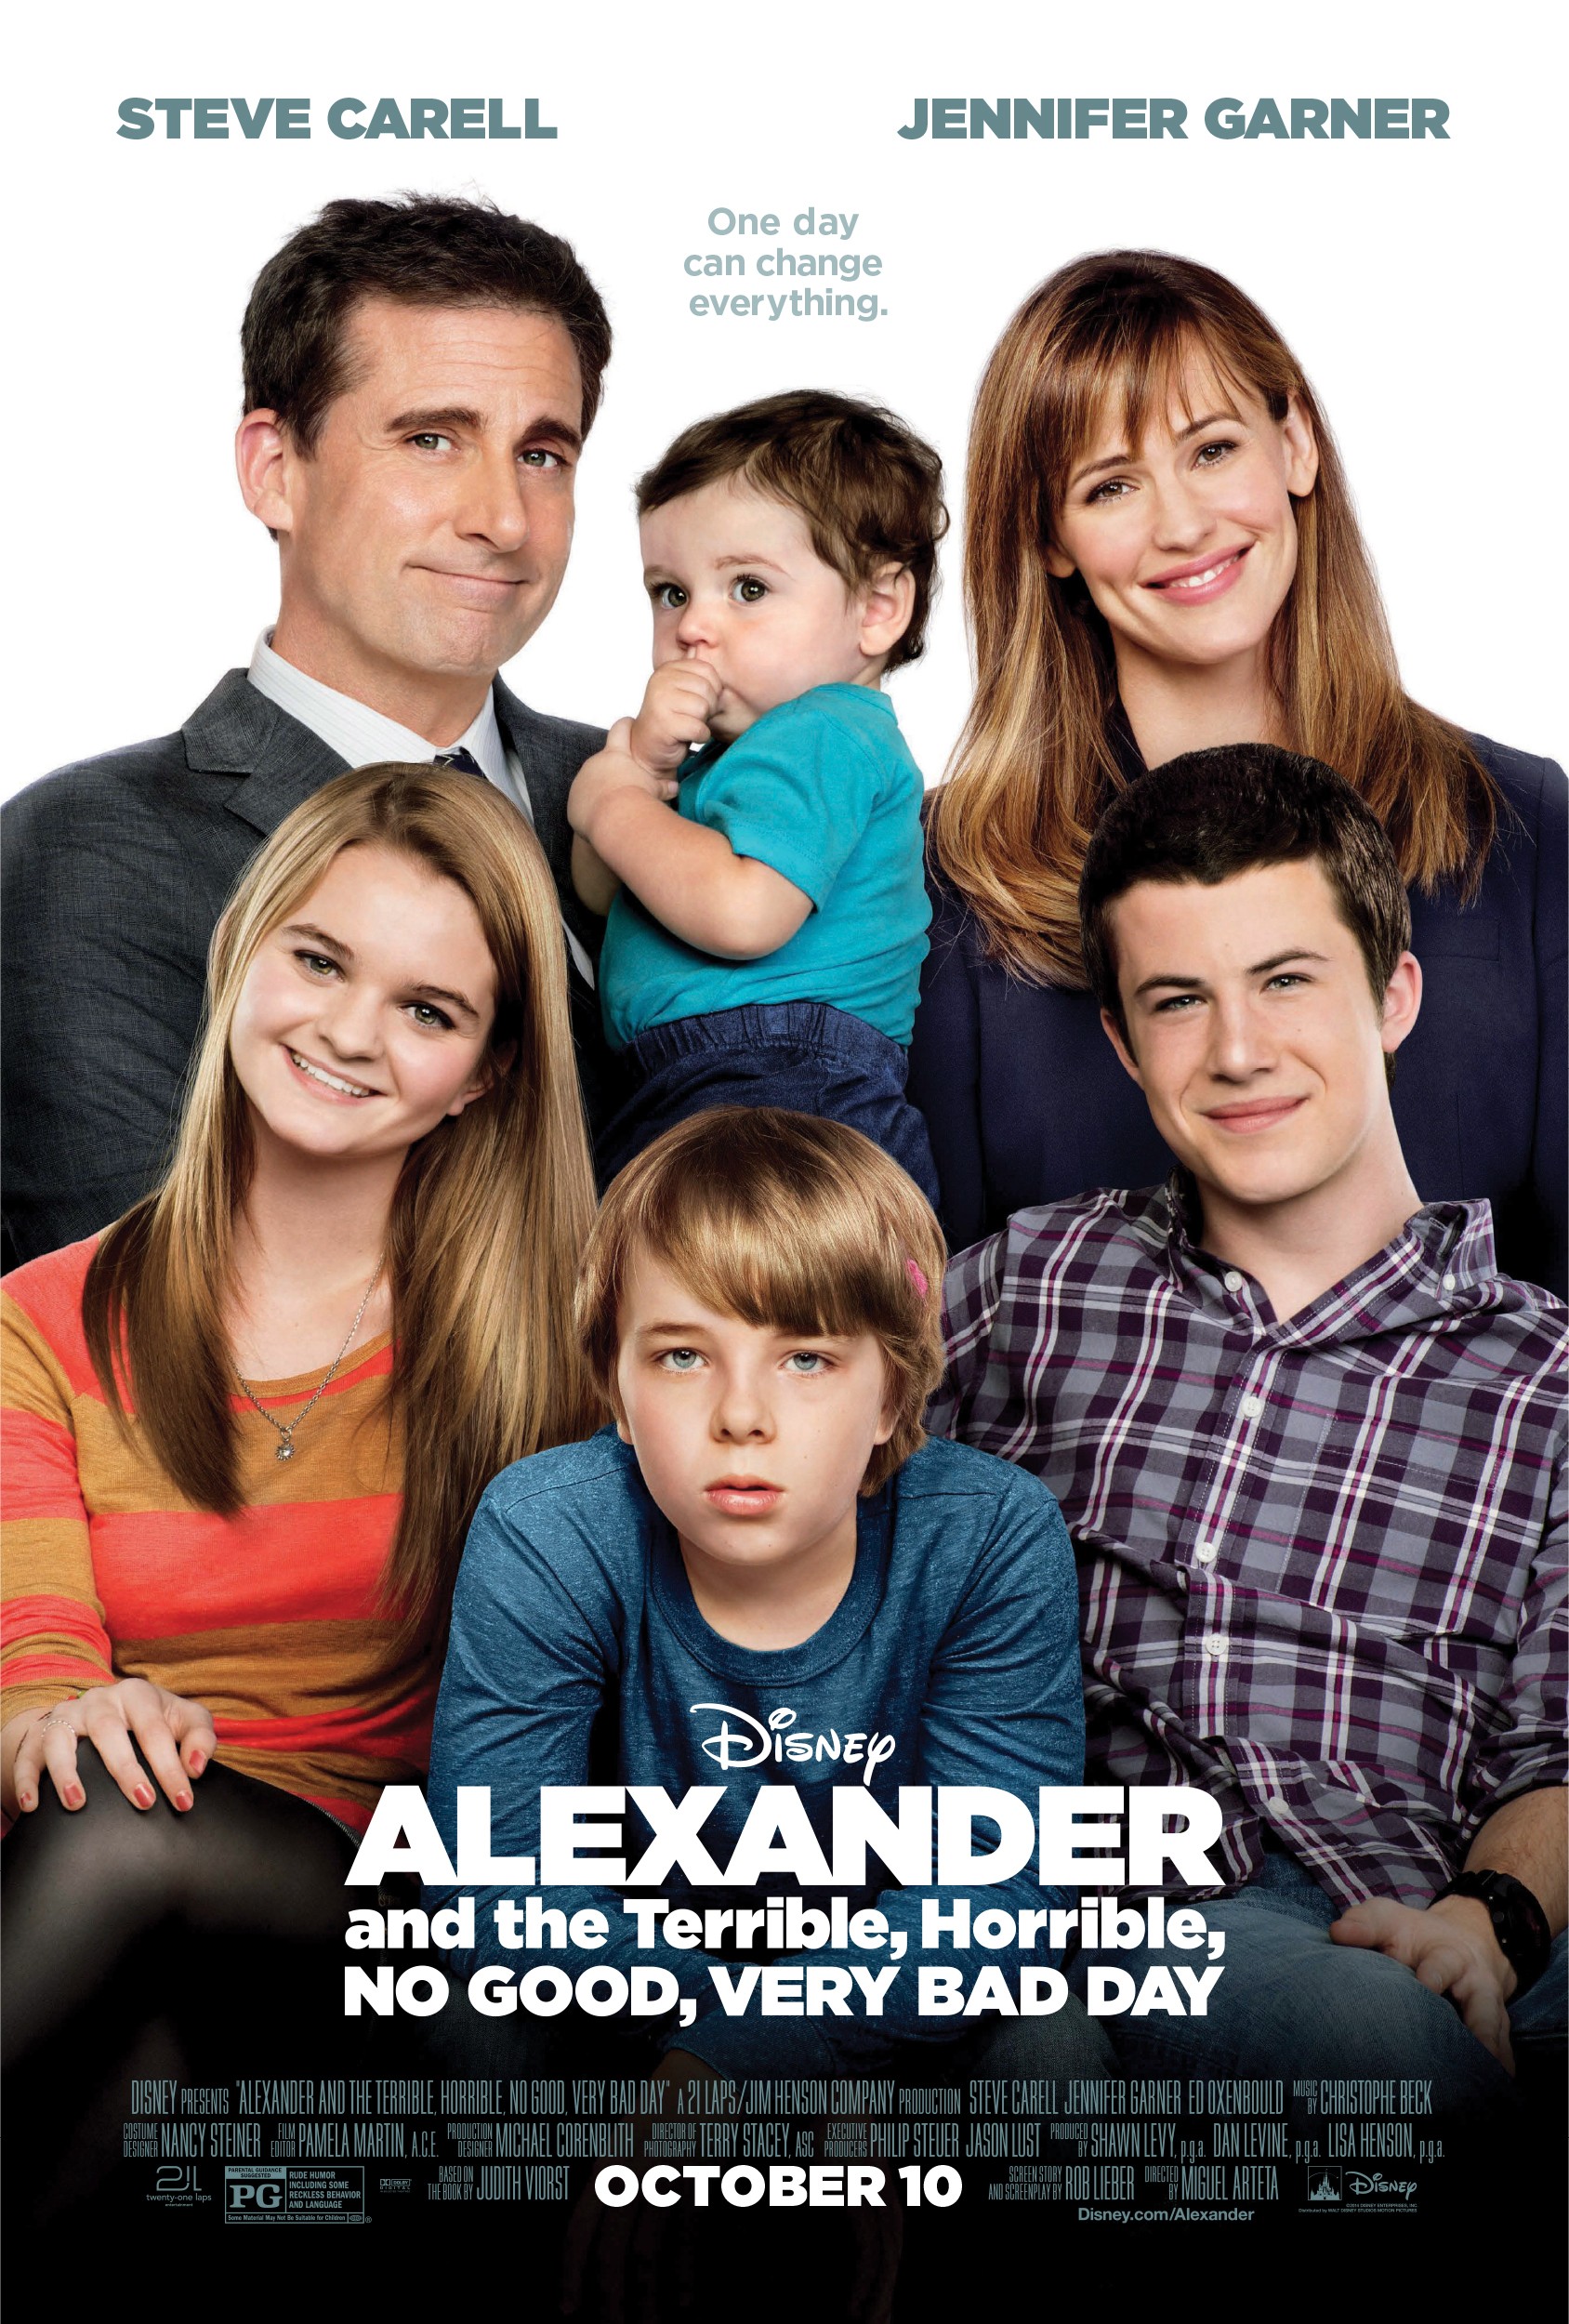 Alexander and the Terrible, Horrible, No Good, Very Bad Day-Official Poster Banner-05AGOSTO2014-01